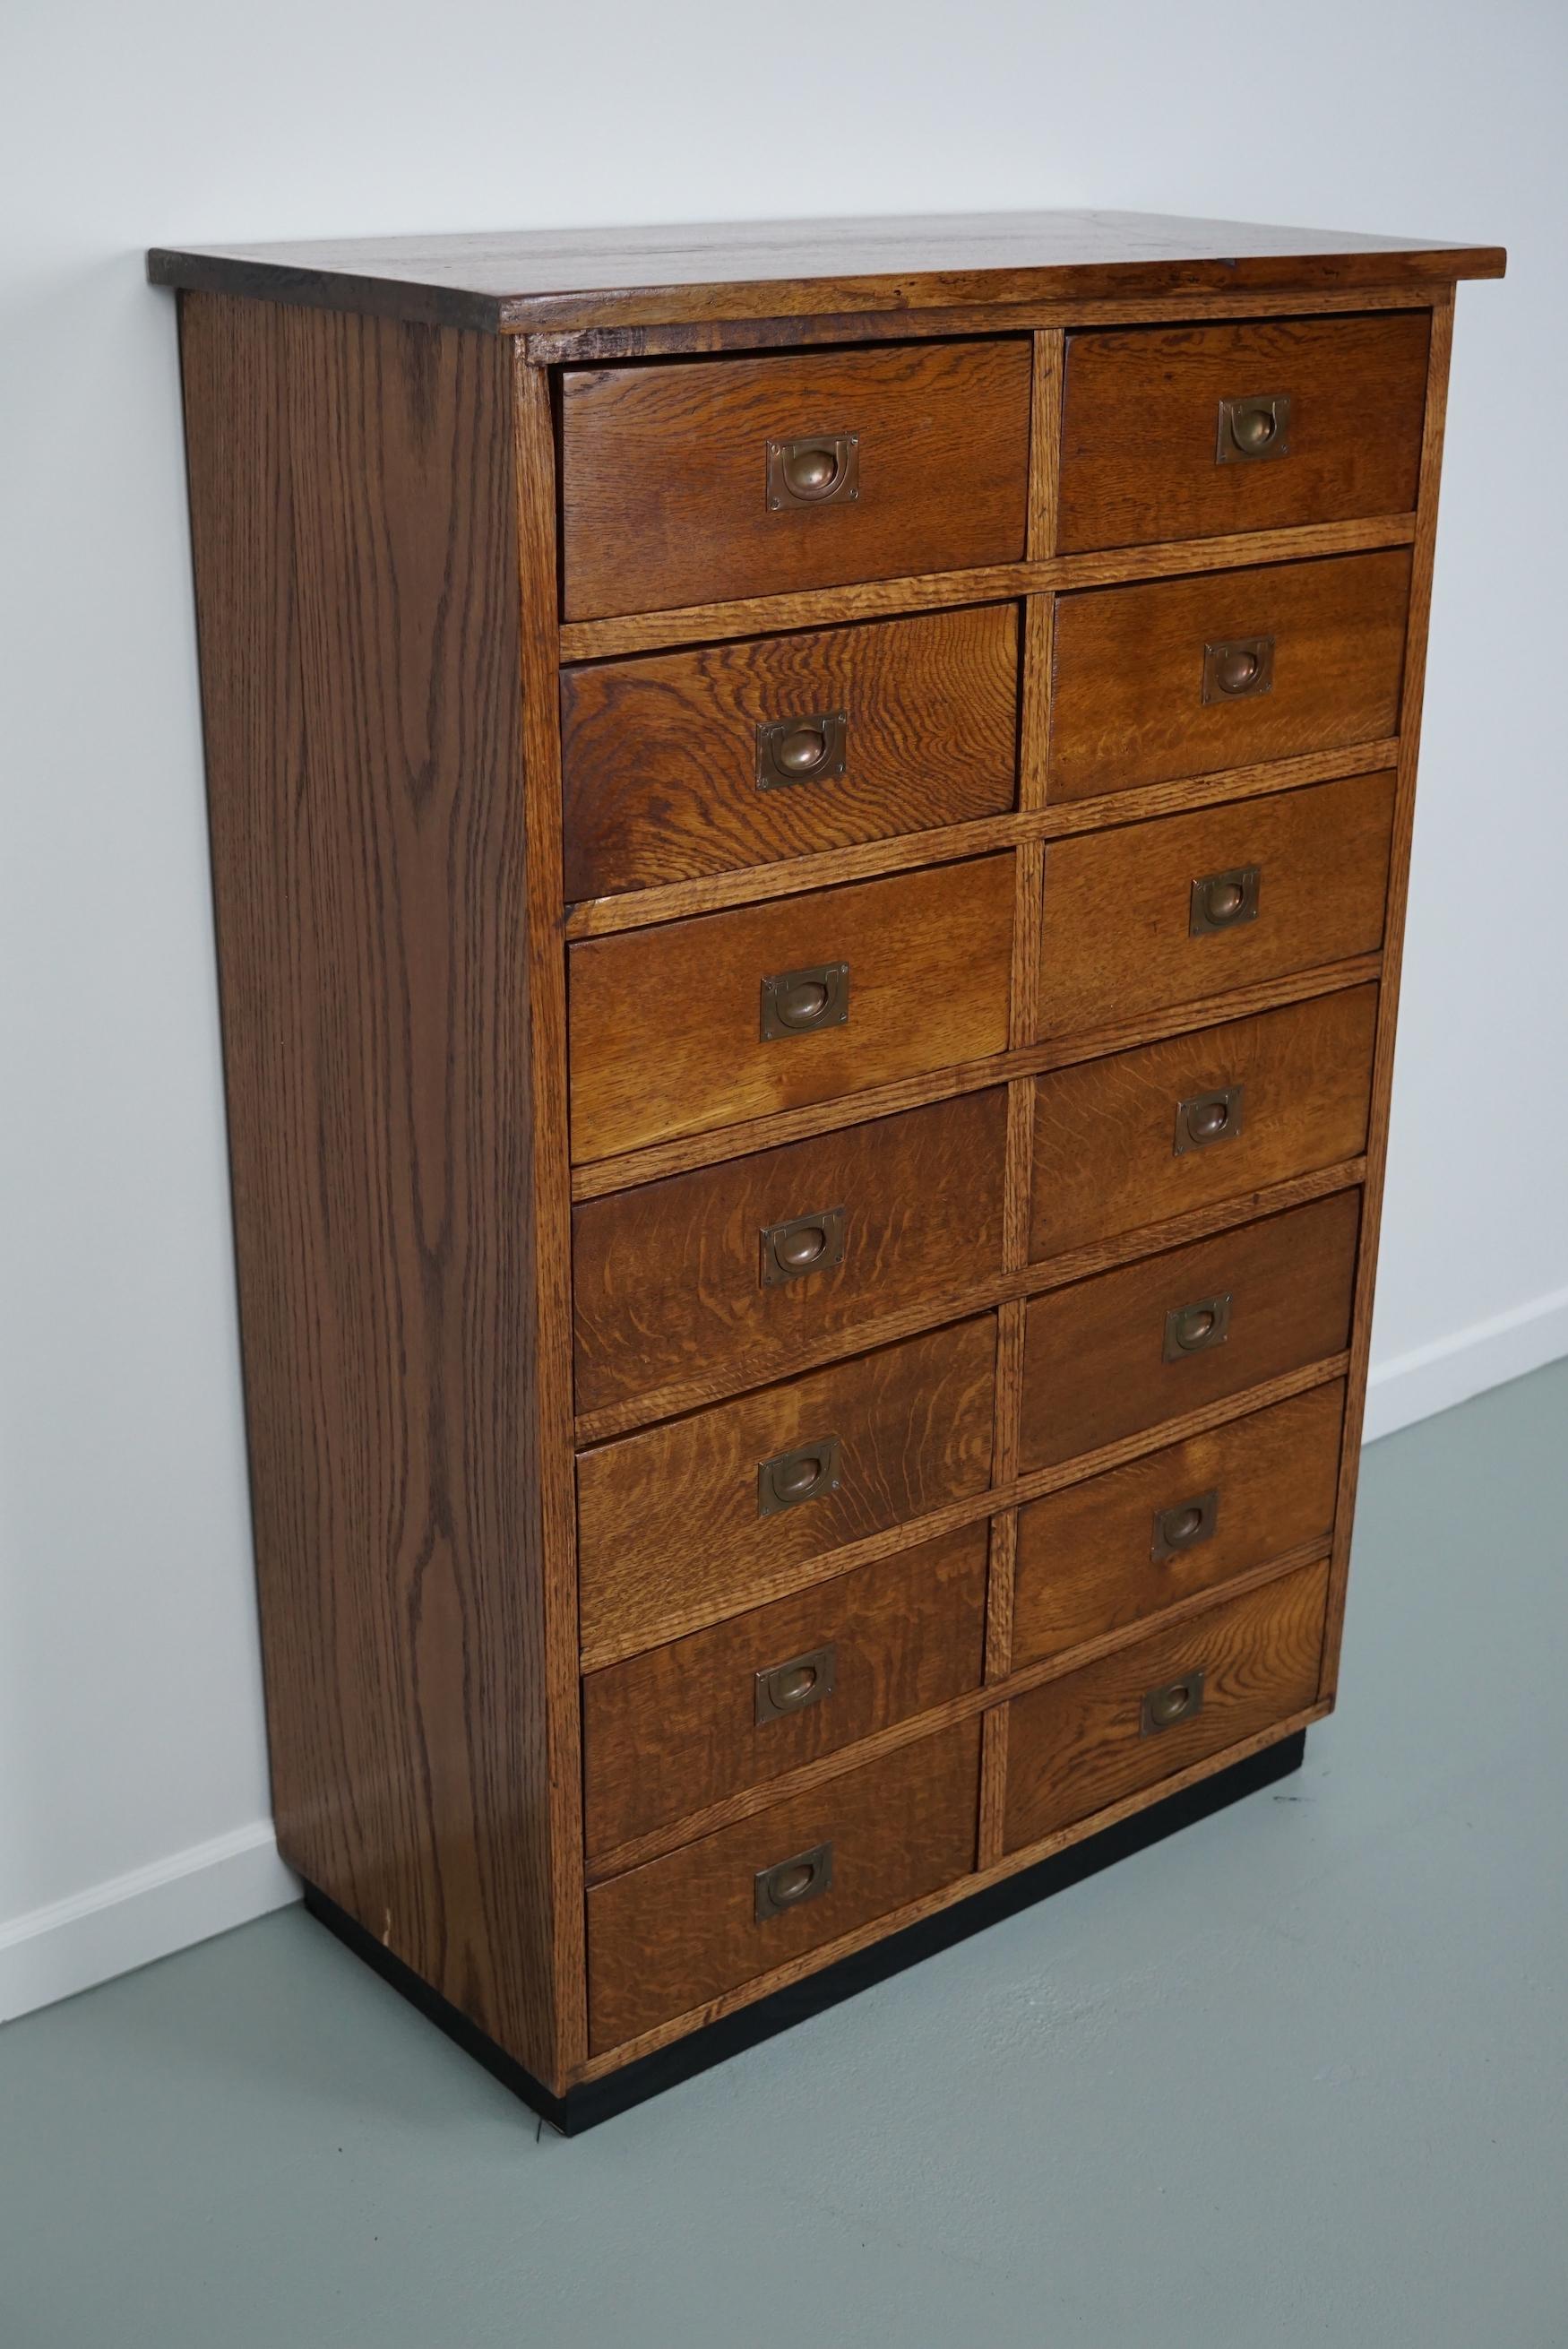 This apothecary cabinet was designed and made from oak circa 1930 in England. It features 14 drawers with brass recessed hardware. The inside of the drawers measure: DWH 30 x 31 x 11 cm.